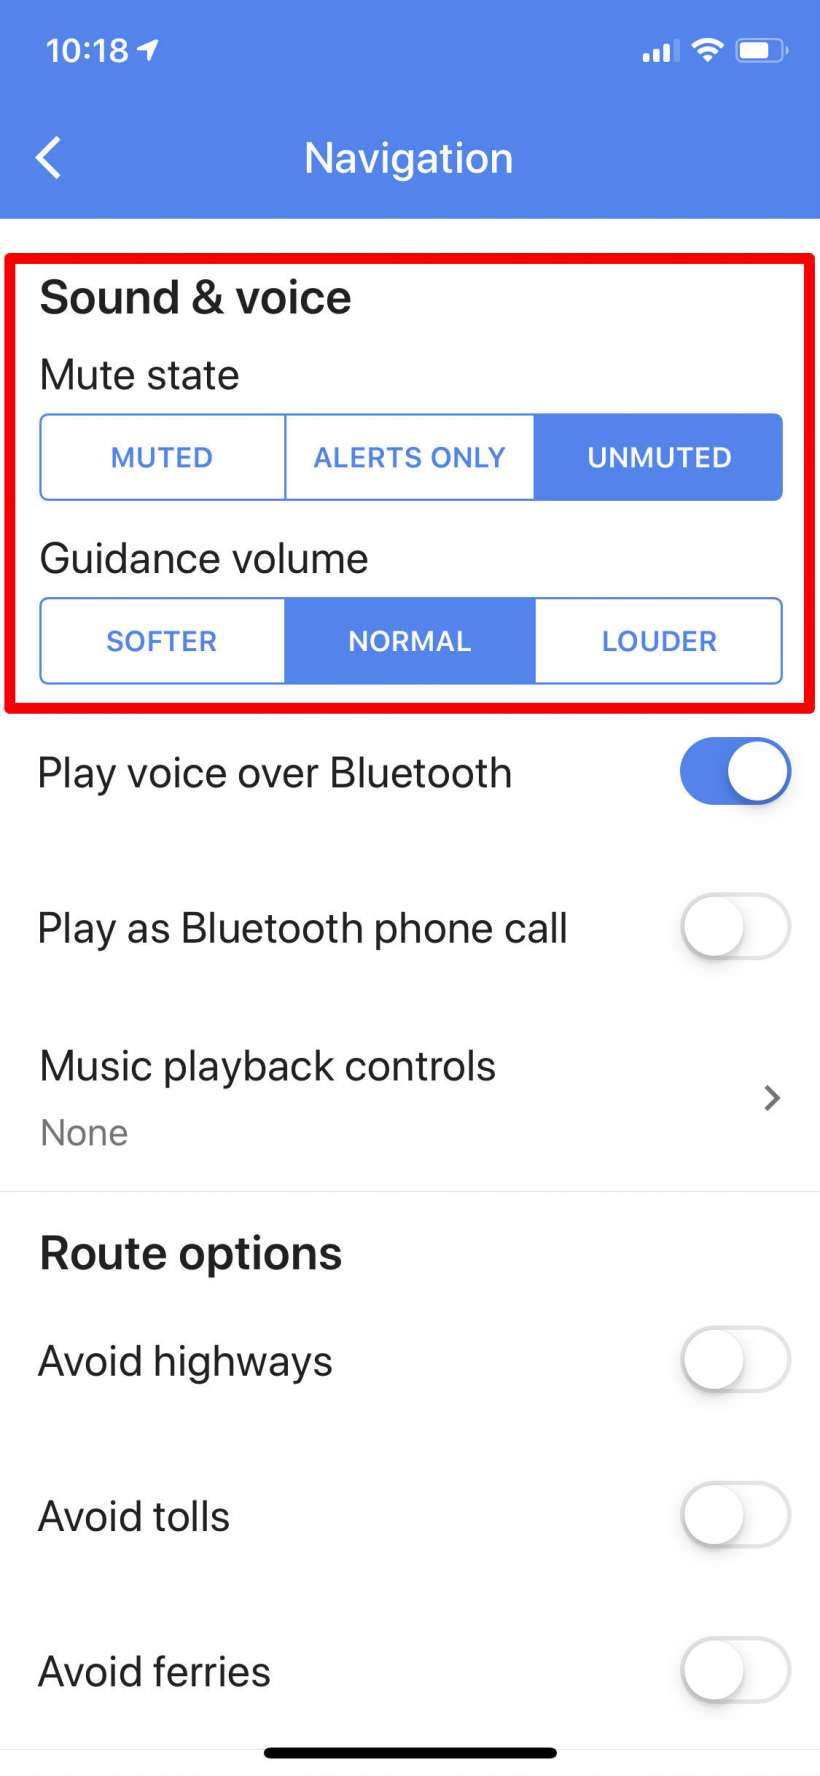 How to turn off turn-by-turn voice directions in Google Maps on iPhone.